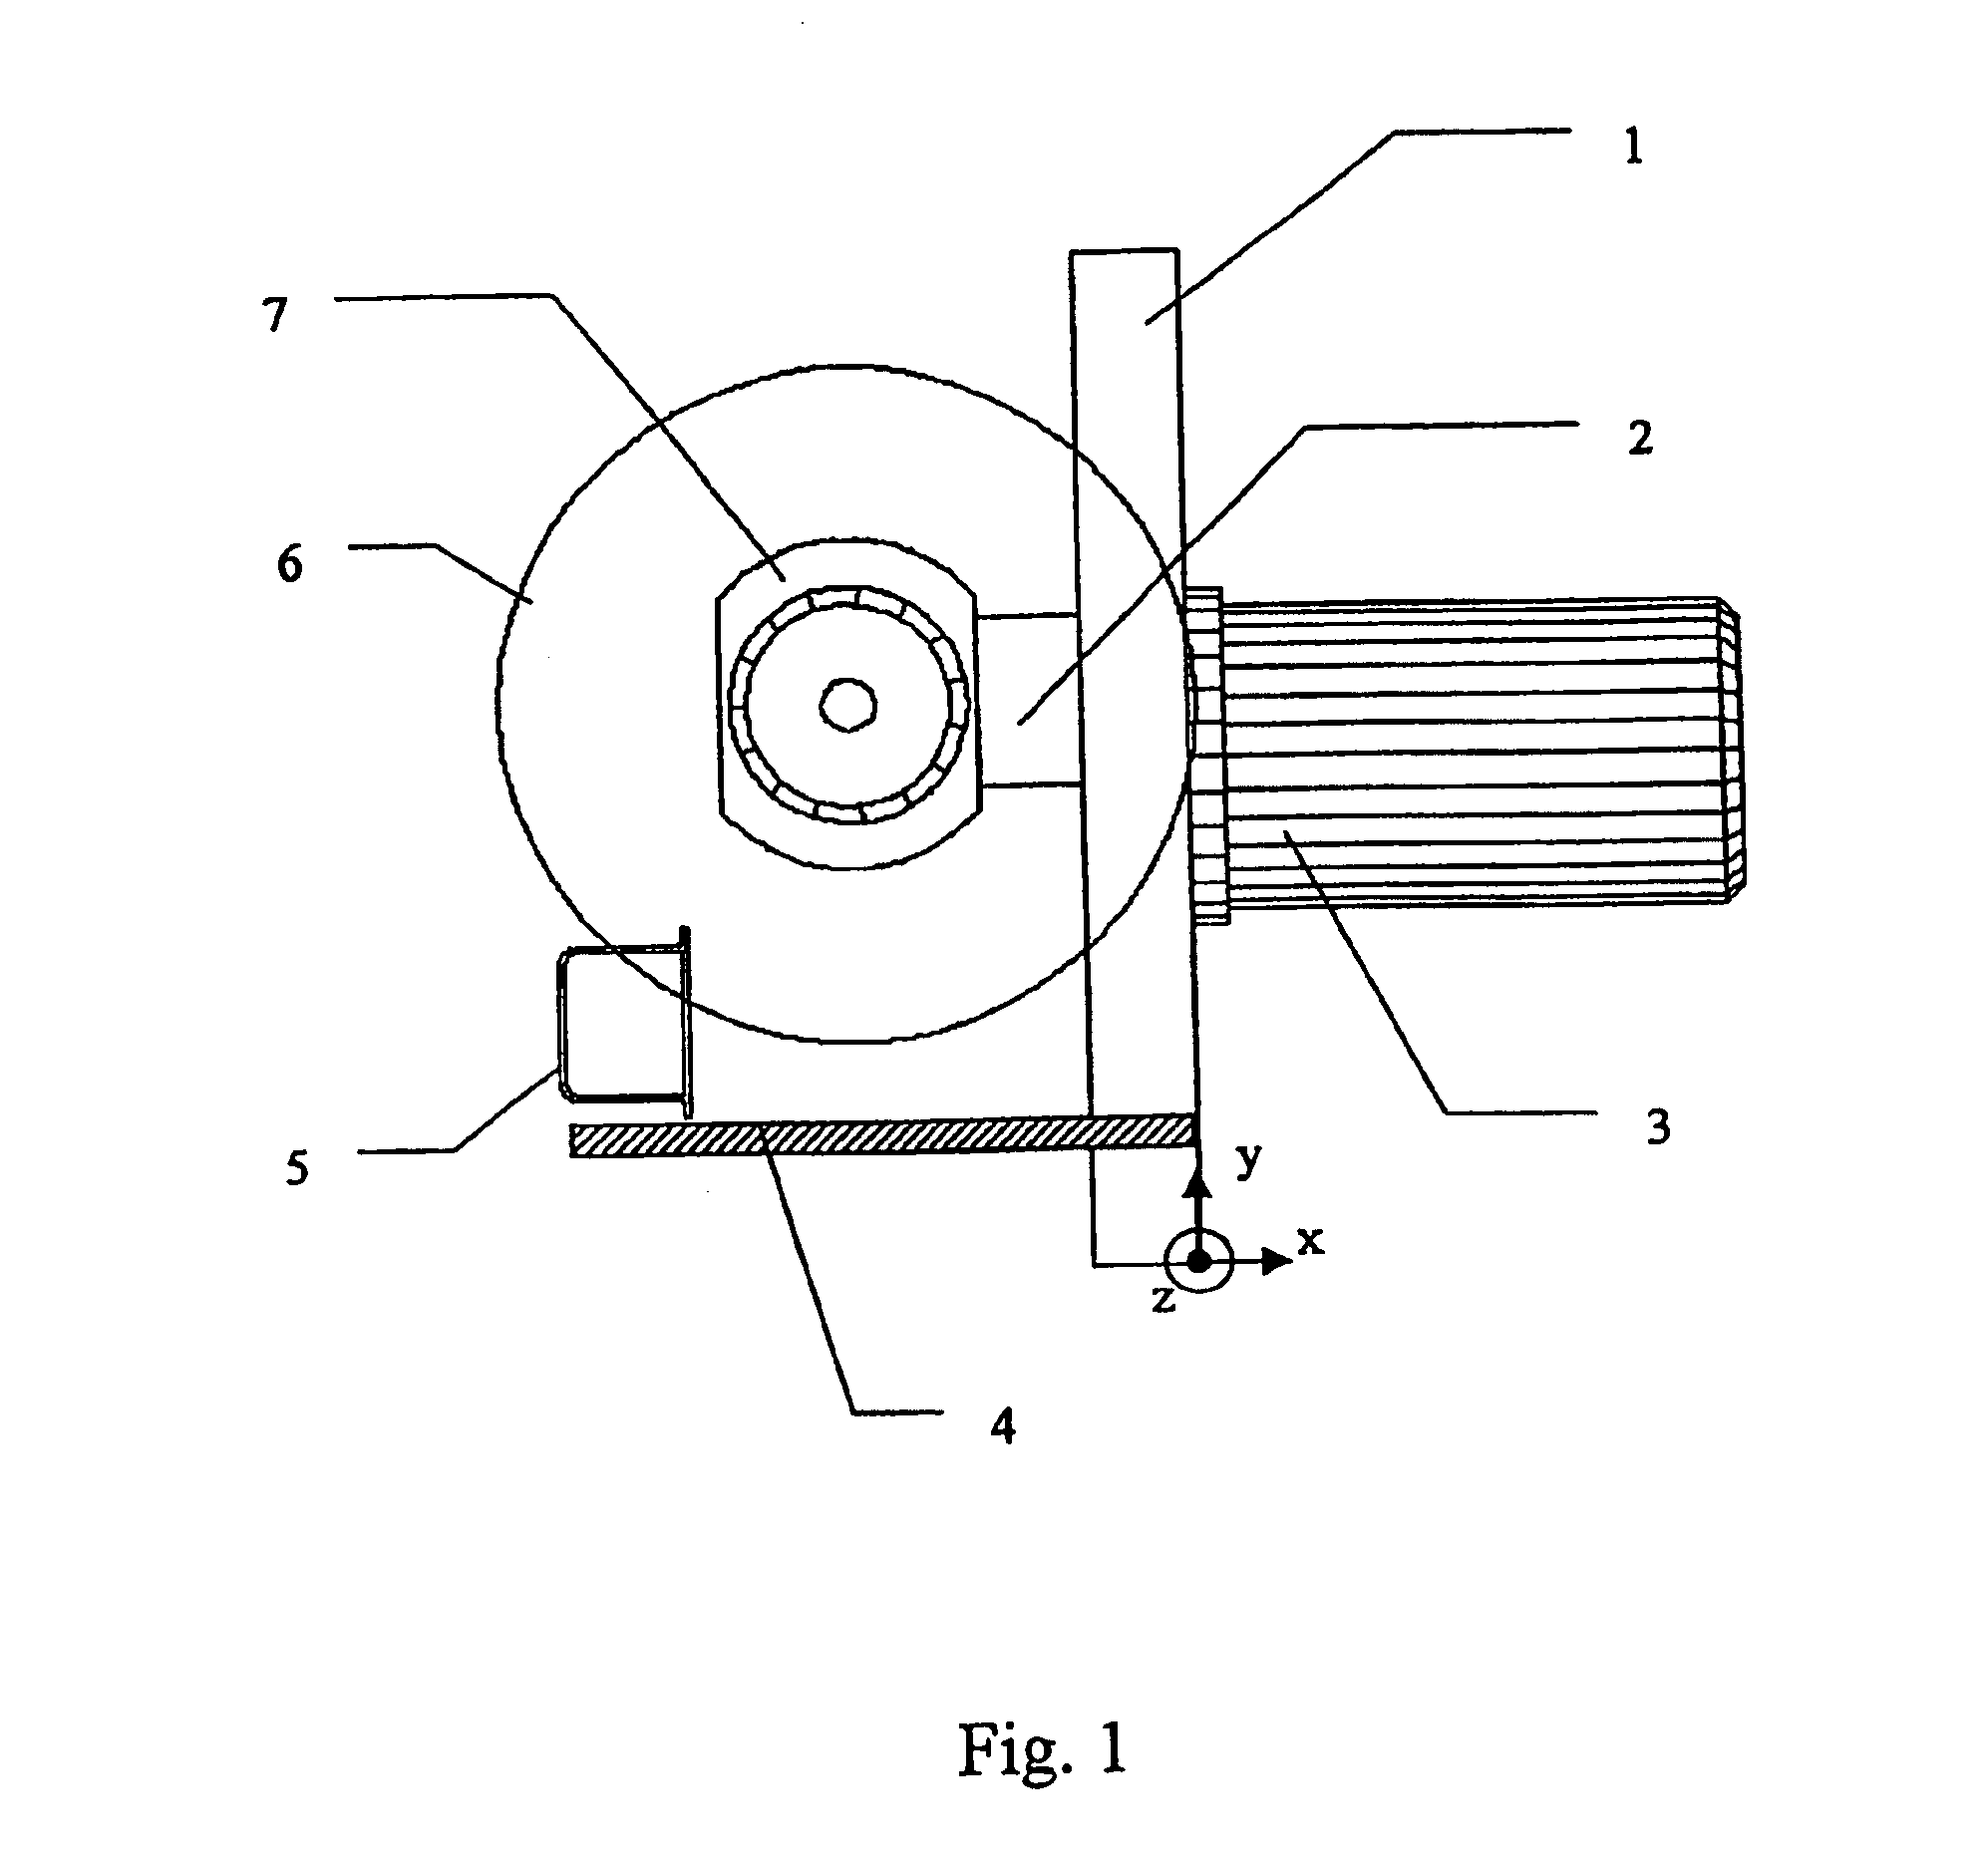 Method for cutting extruded profile sections into lengths